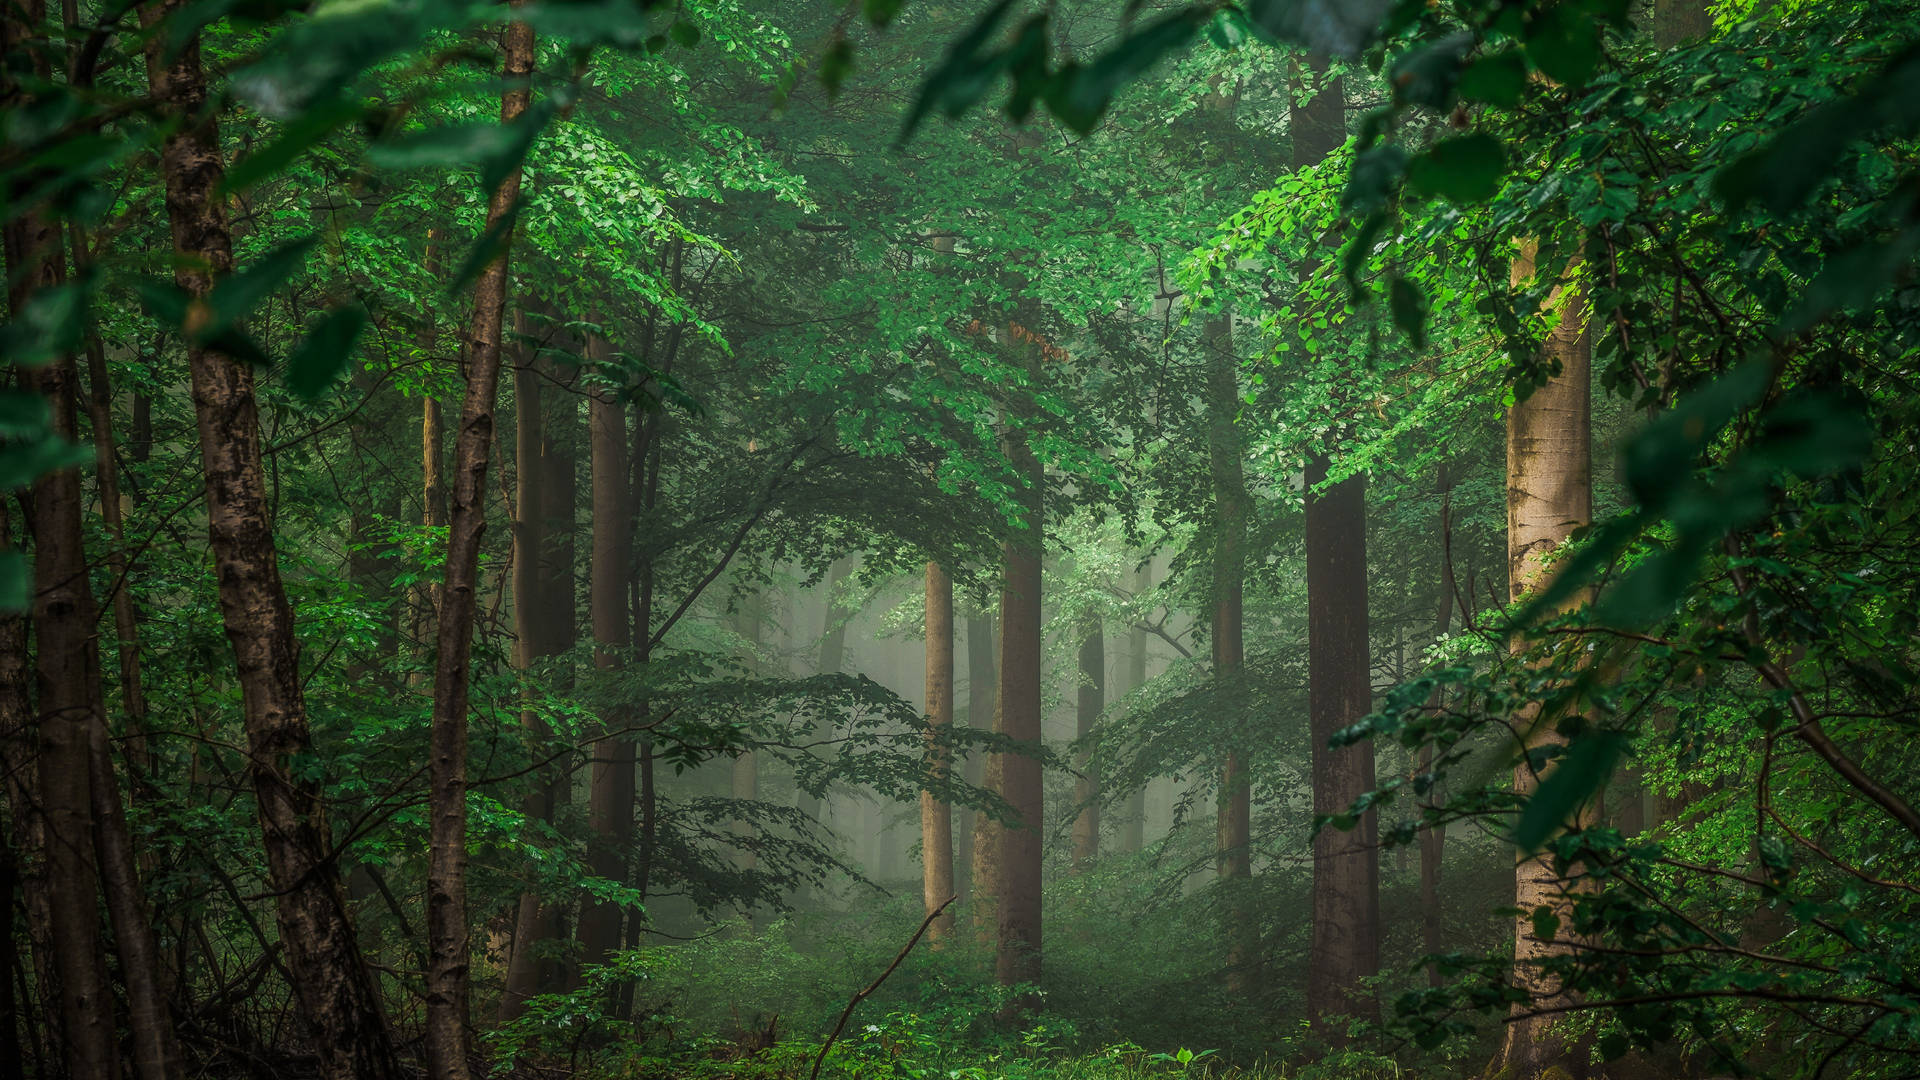 Free Forest Wallpaper Downloads, [1200+] Forest Wallpapers for FREE |  